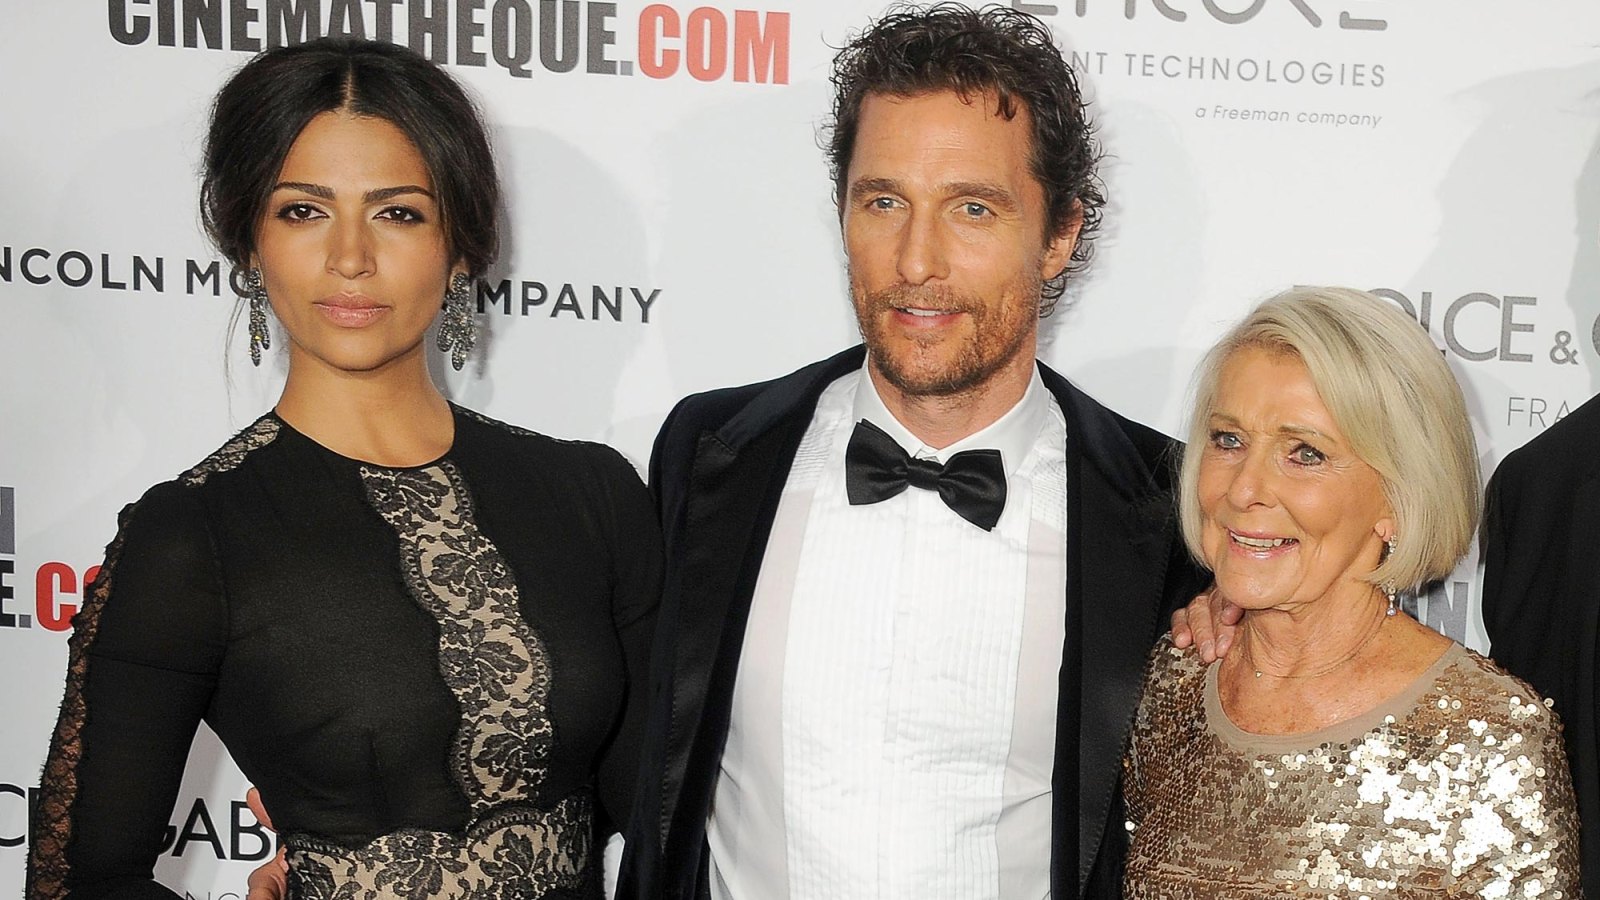 Matthew McConaughey Confirms His Mom Tested Wife Camila Alves We Are Big on Rites of Passage